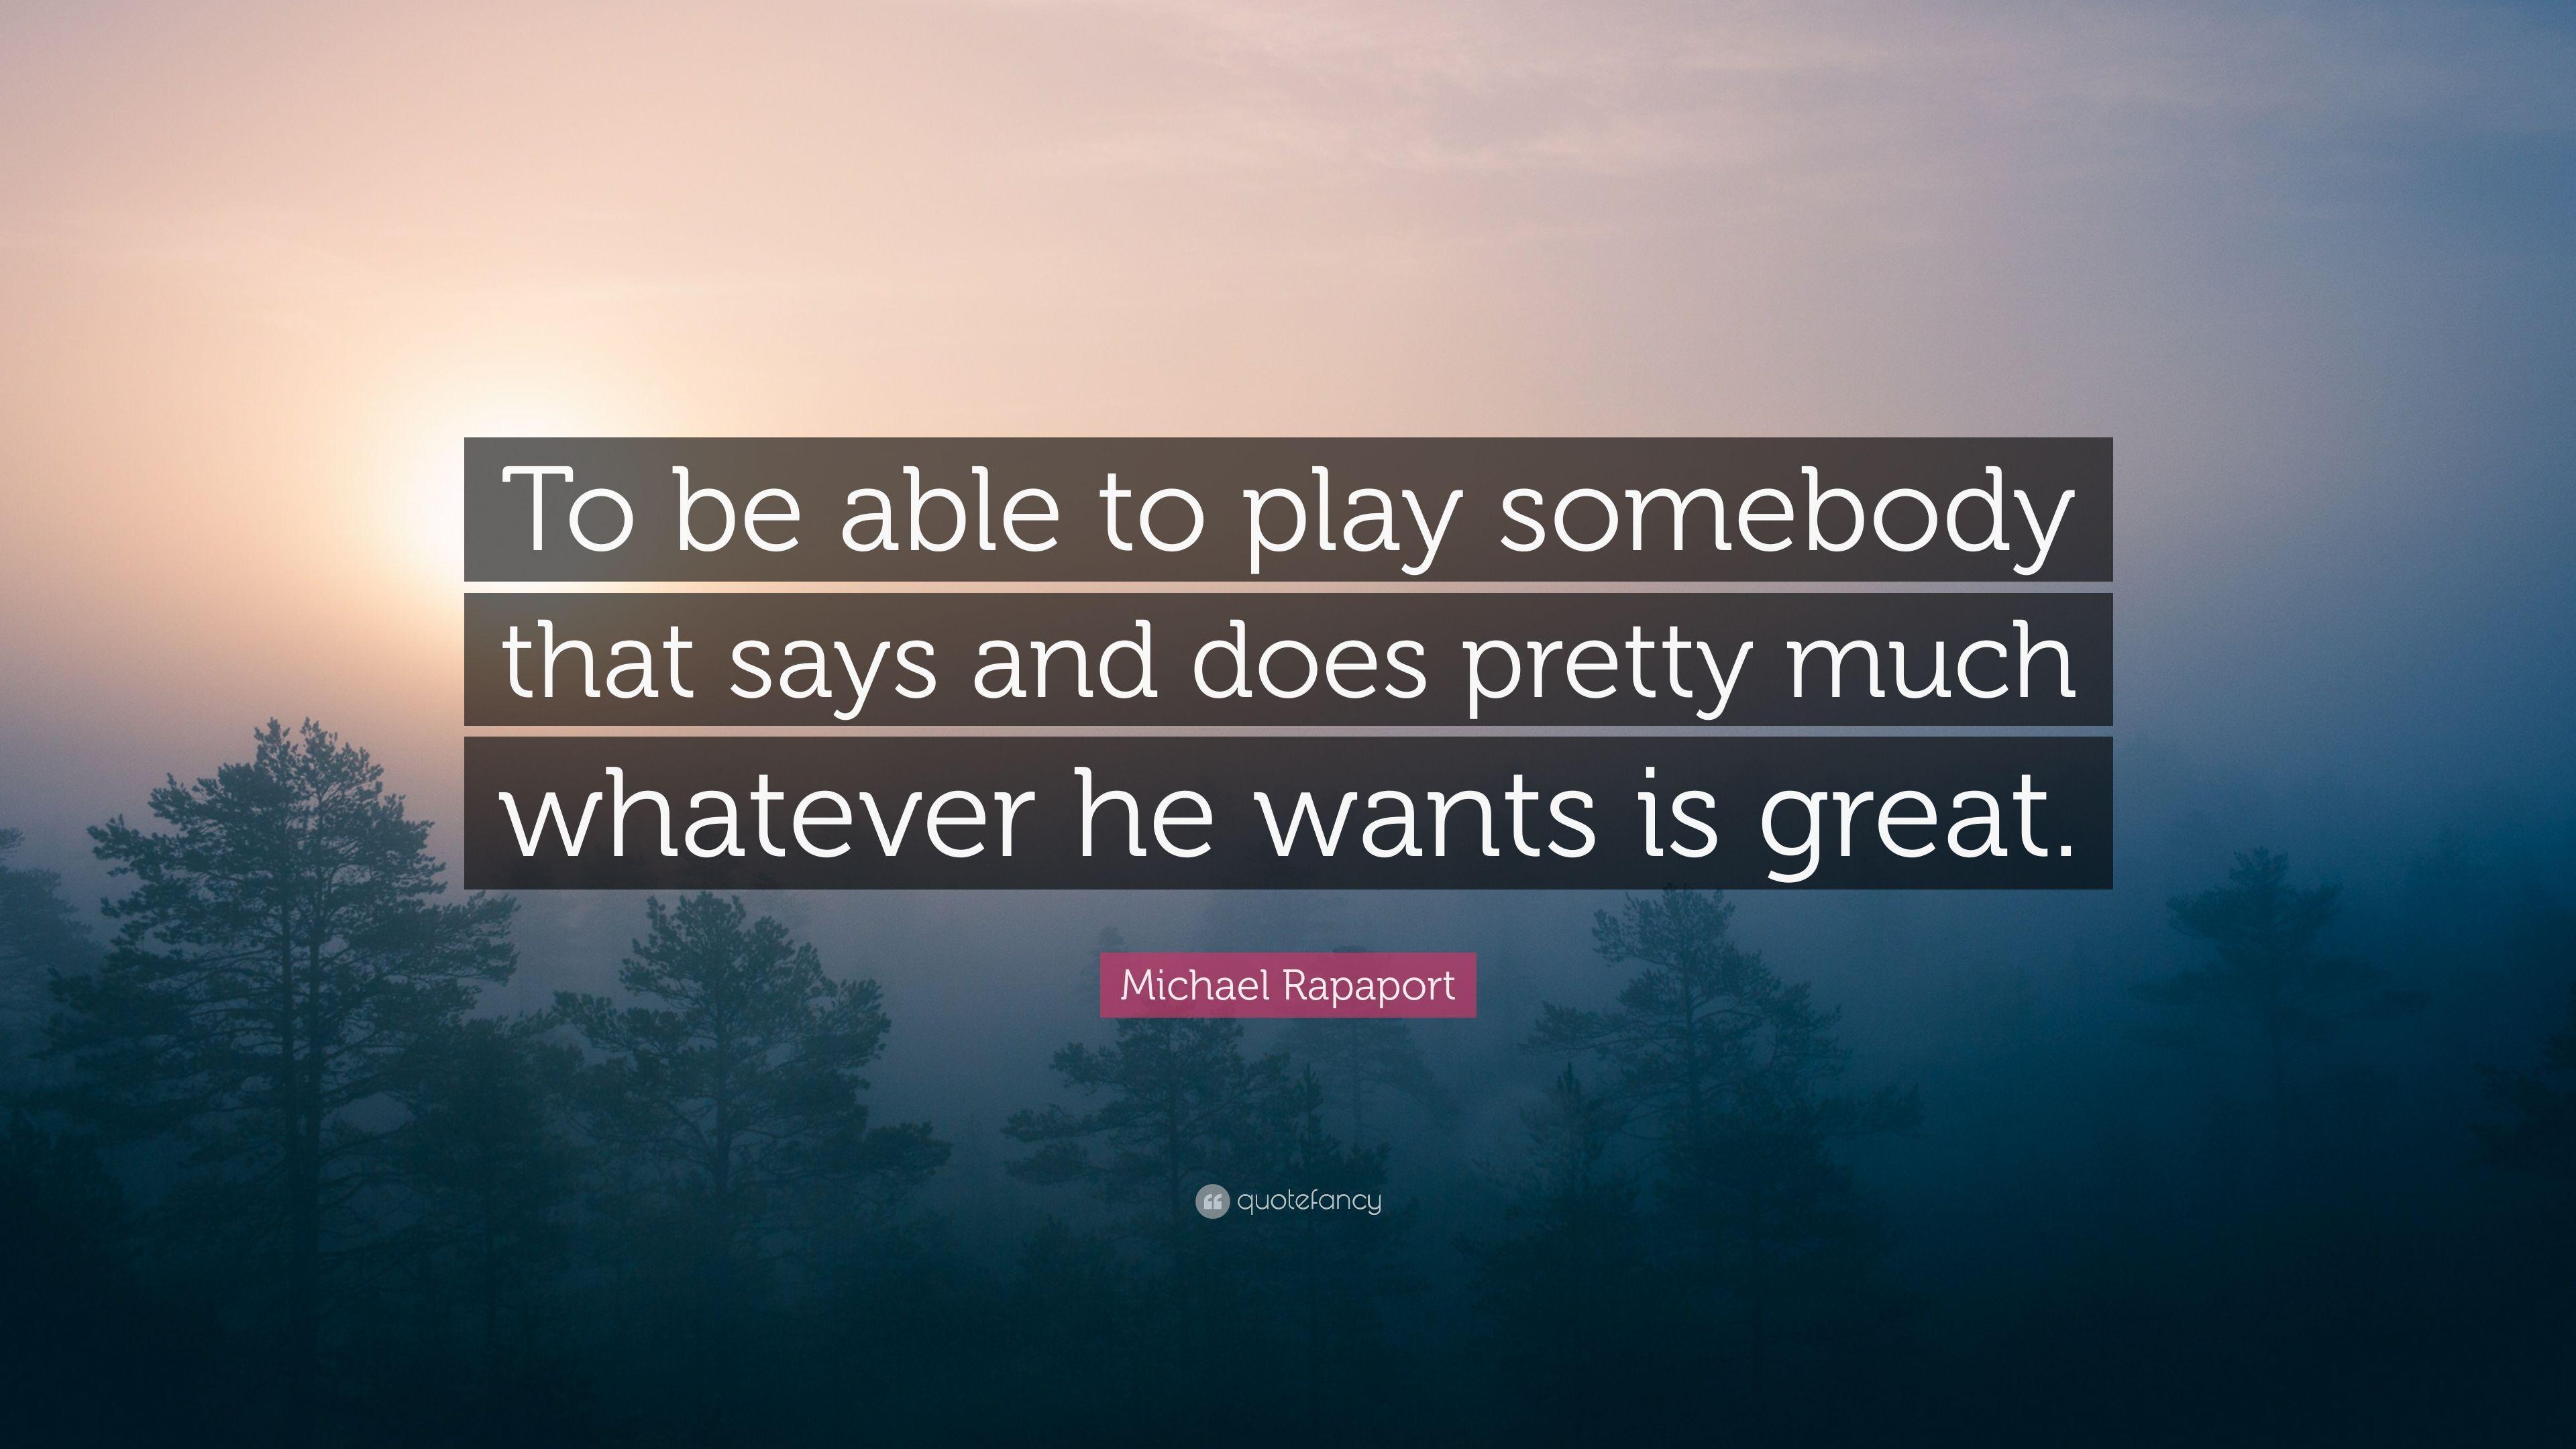 Michael Rapaport Quote: “To be able to play somebody that says